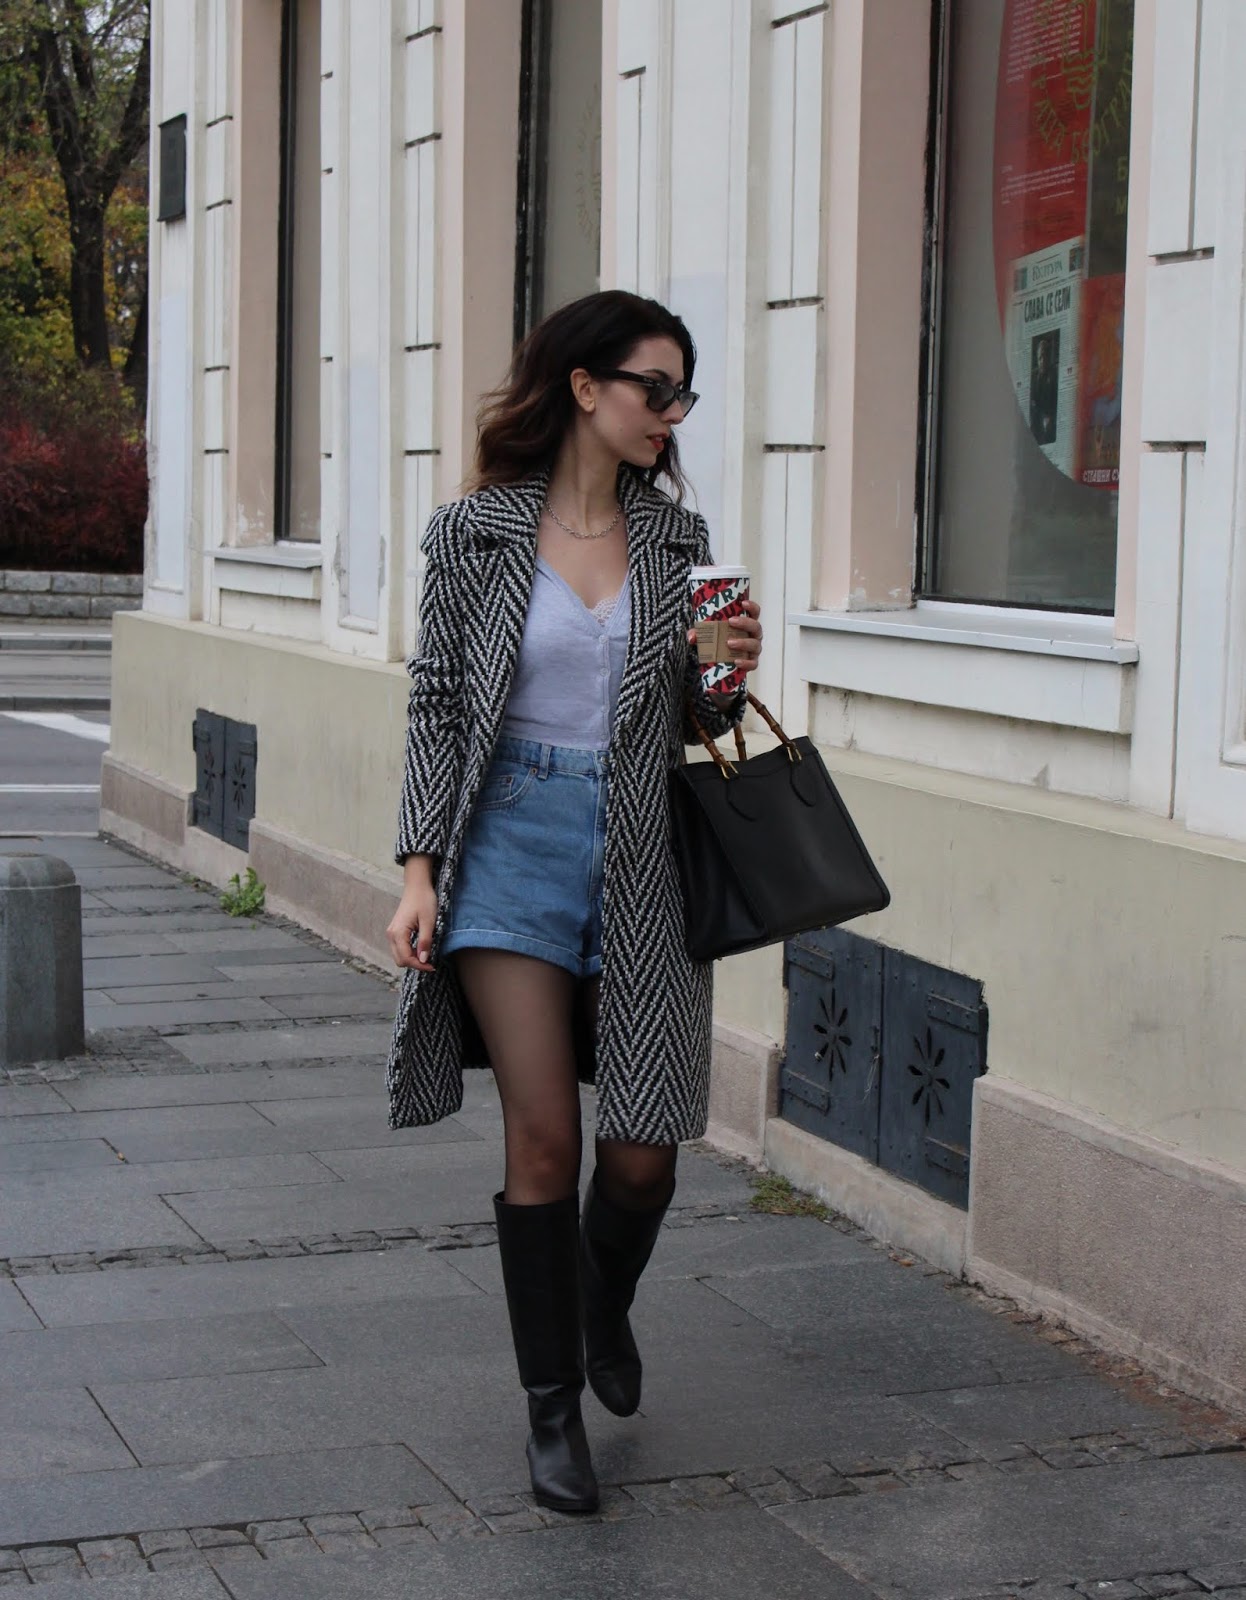 Wearing shorts in colder weather | BEAUTY FINE PRINT